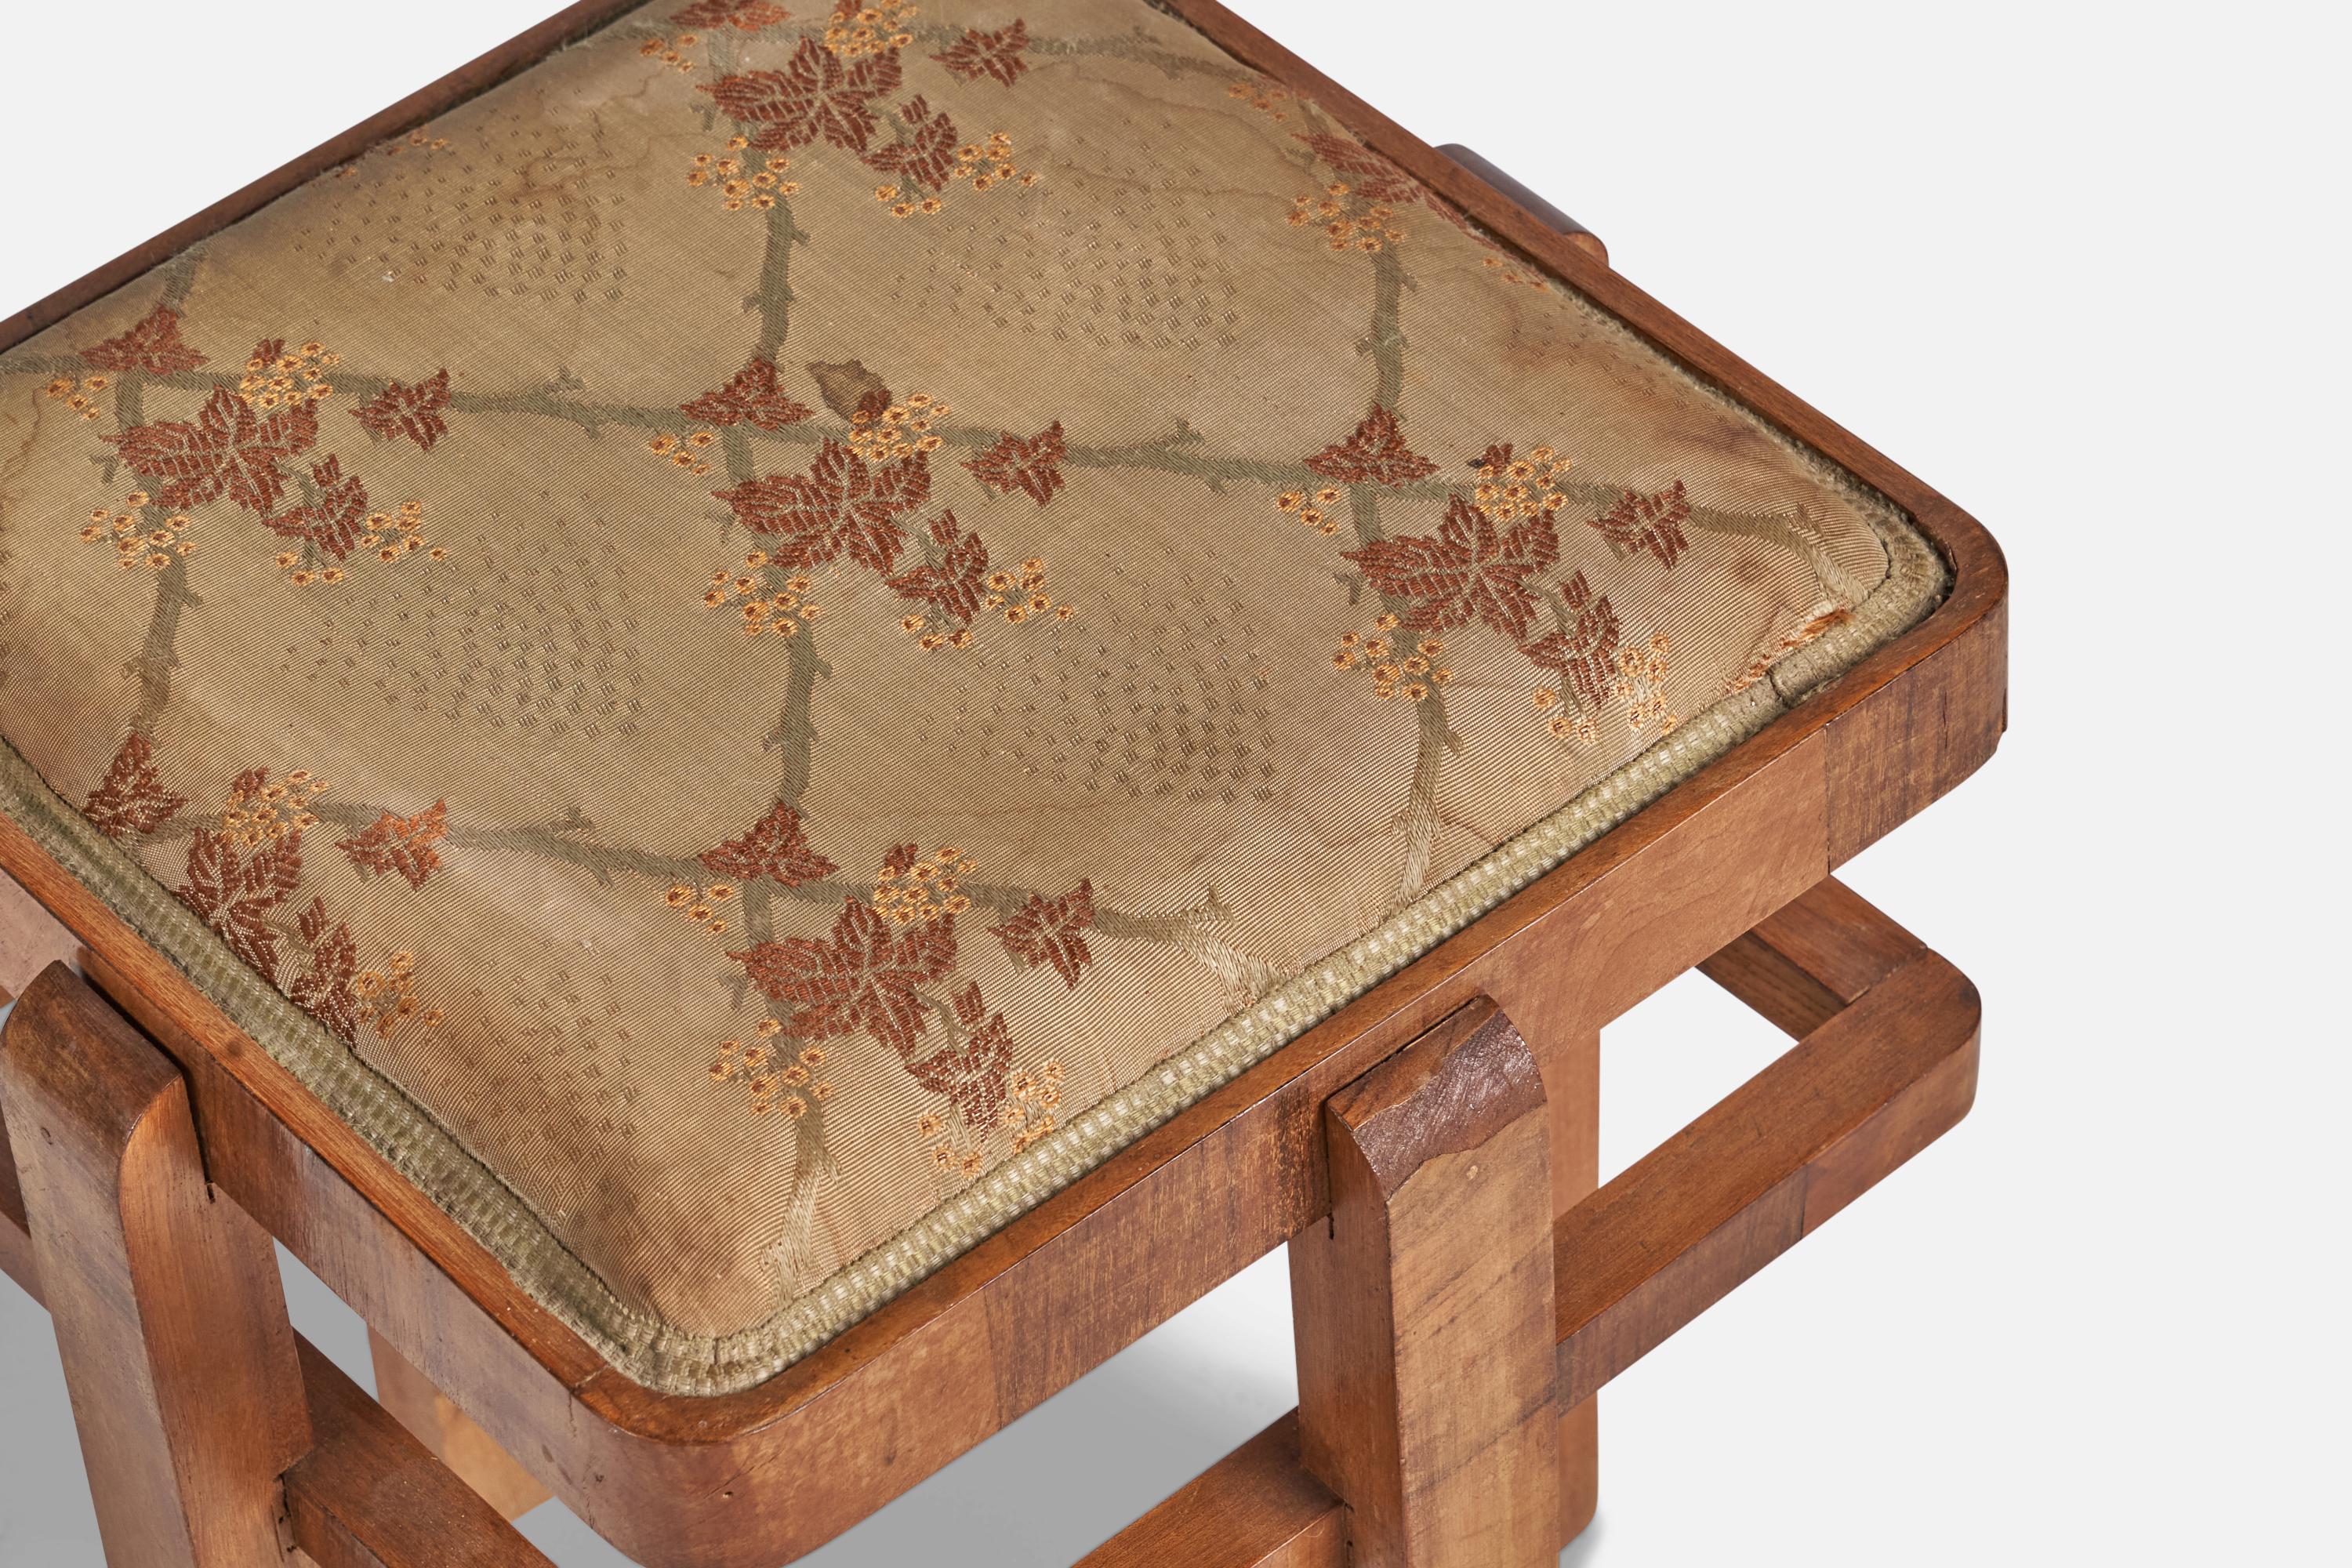 A walnut and beige fabric stool designed and produced in Italy, c. 1930s.